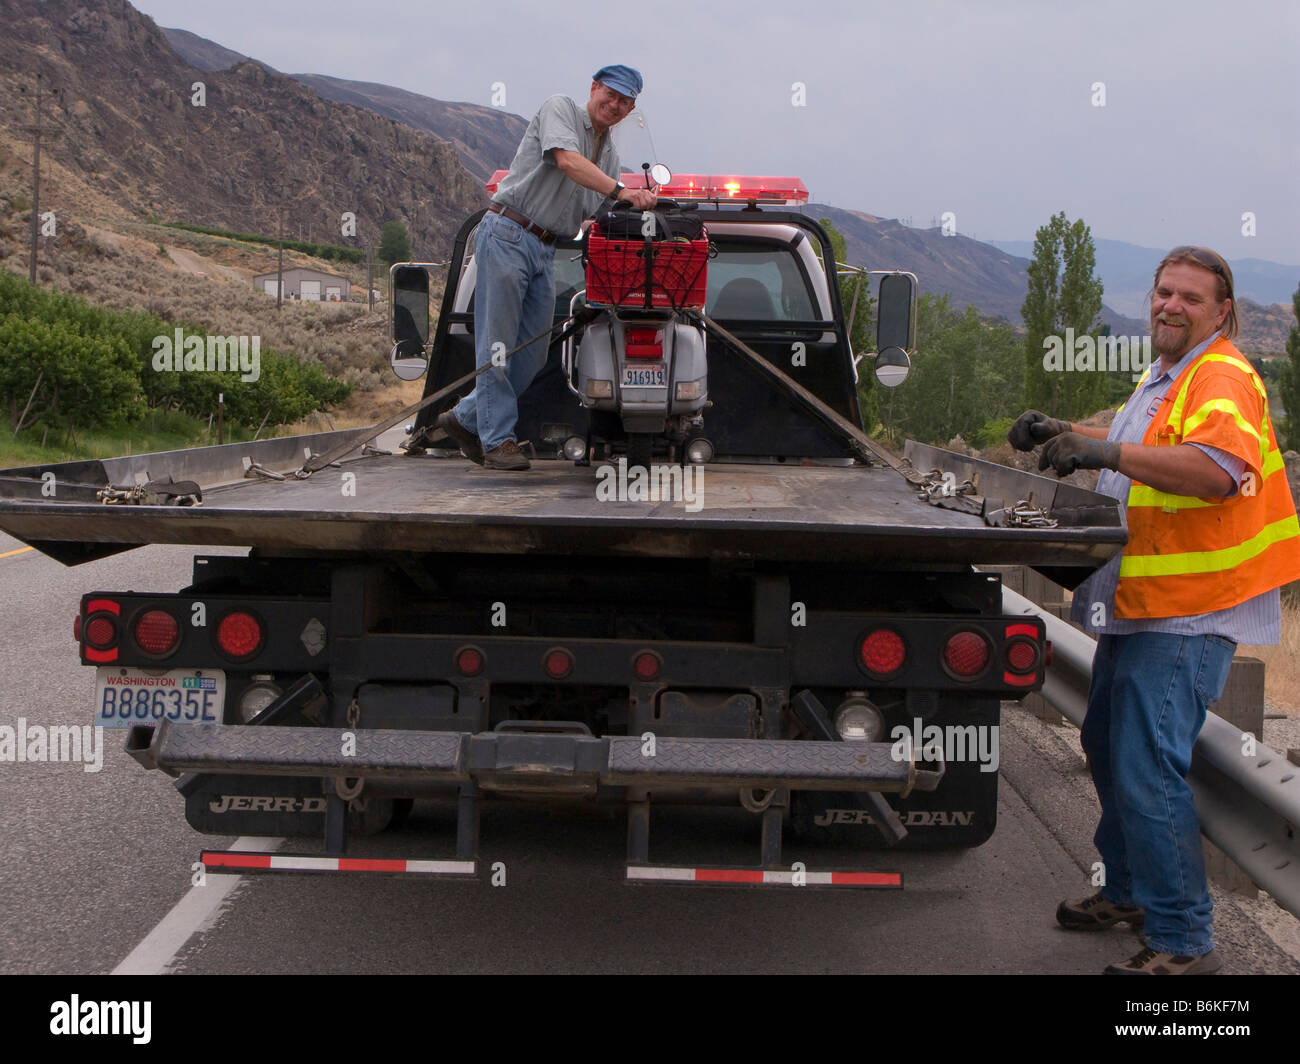 Robert Doc Morgan with his Vespa P200E loaded onto a flatbed truck by the side of US Highway 2 near Wenatchee Washington Stock Photo